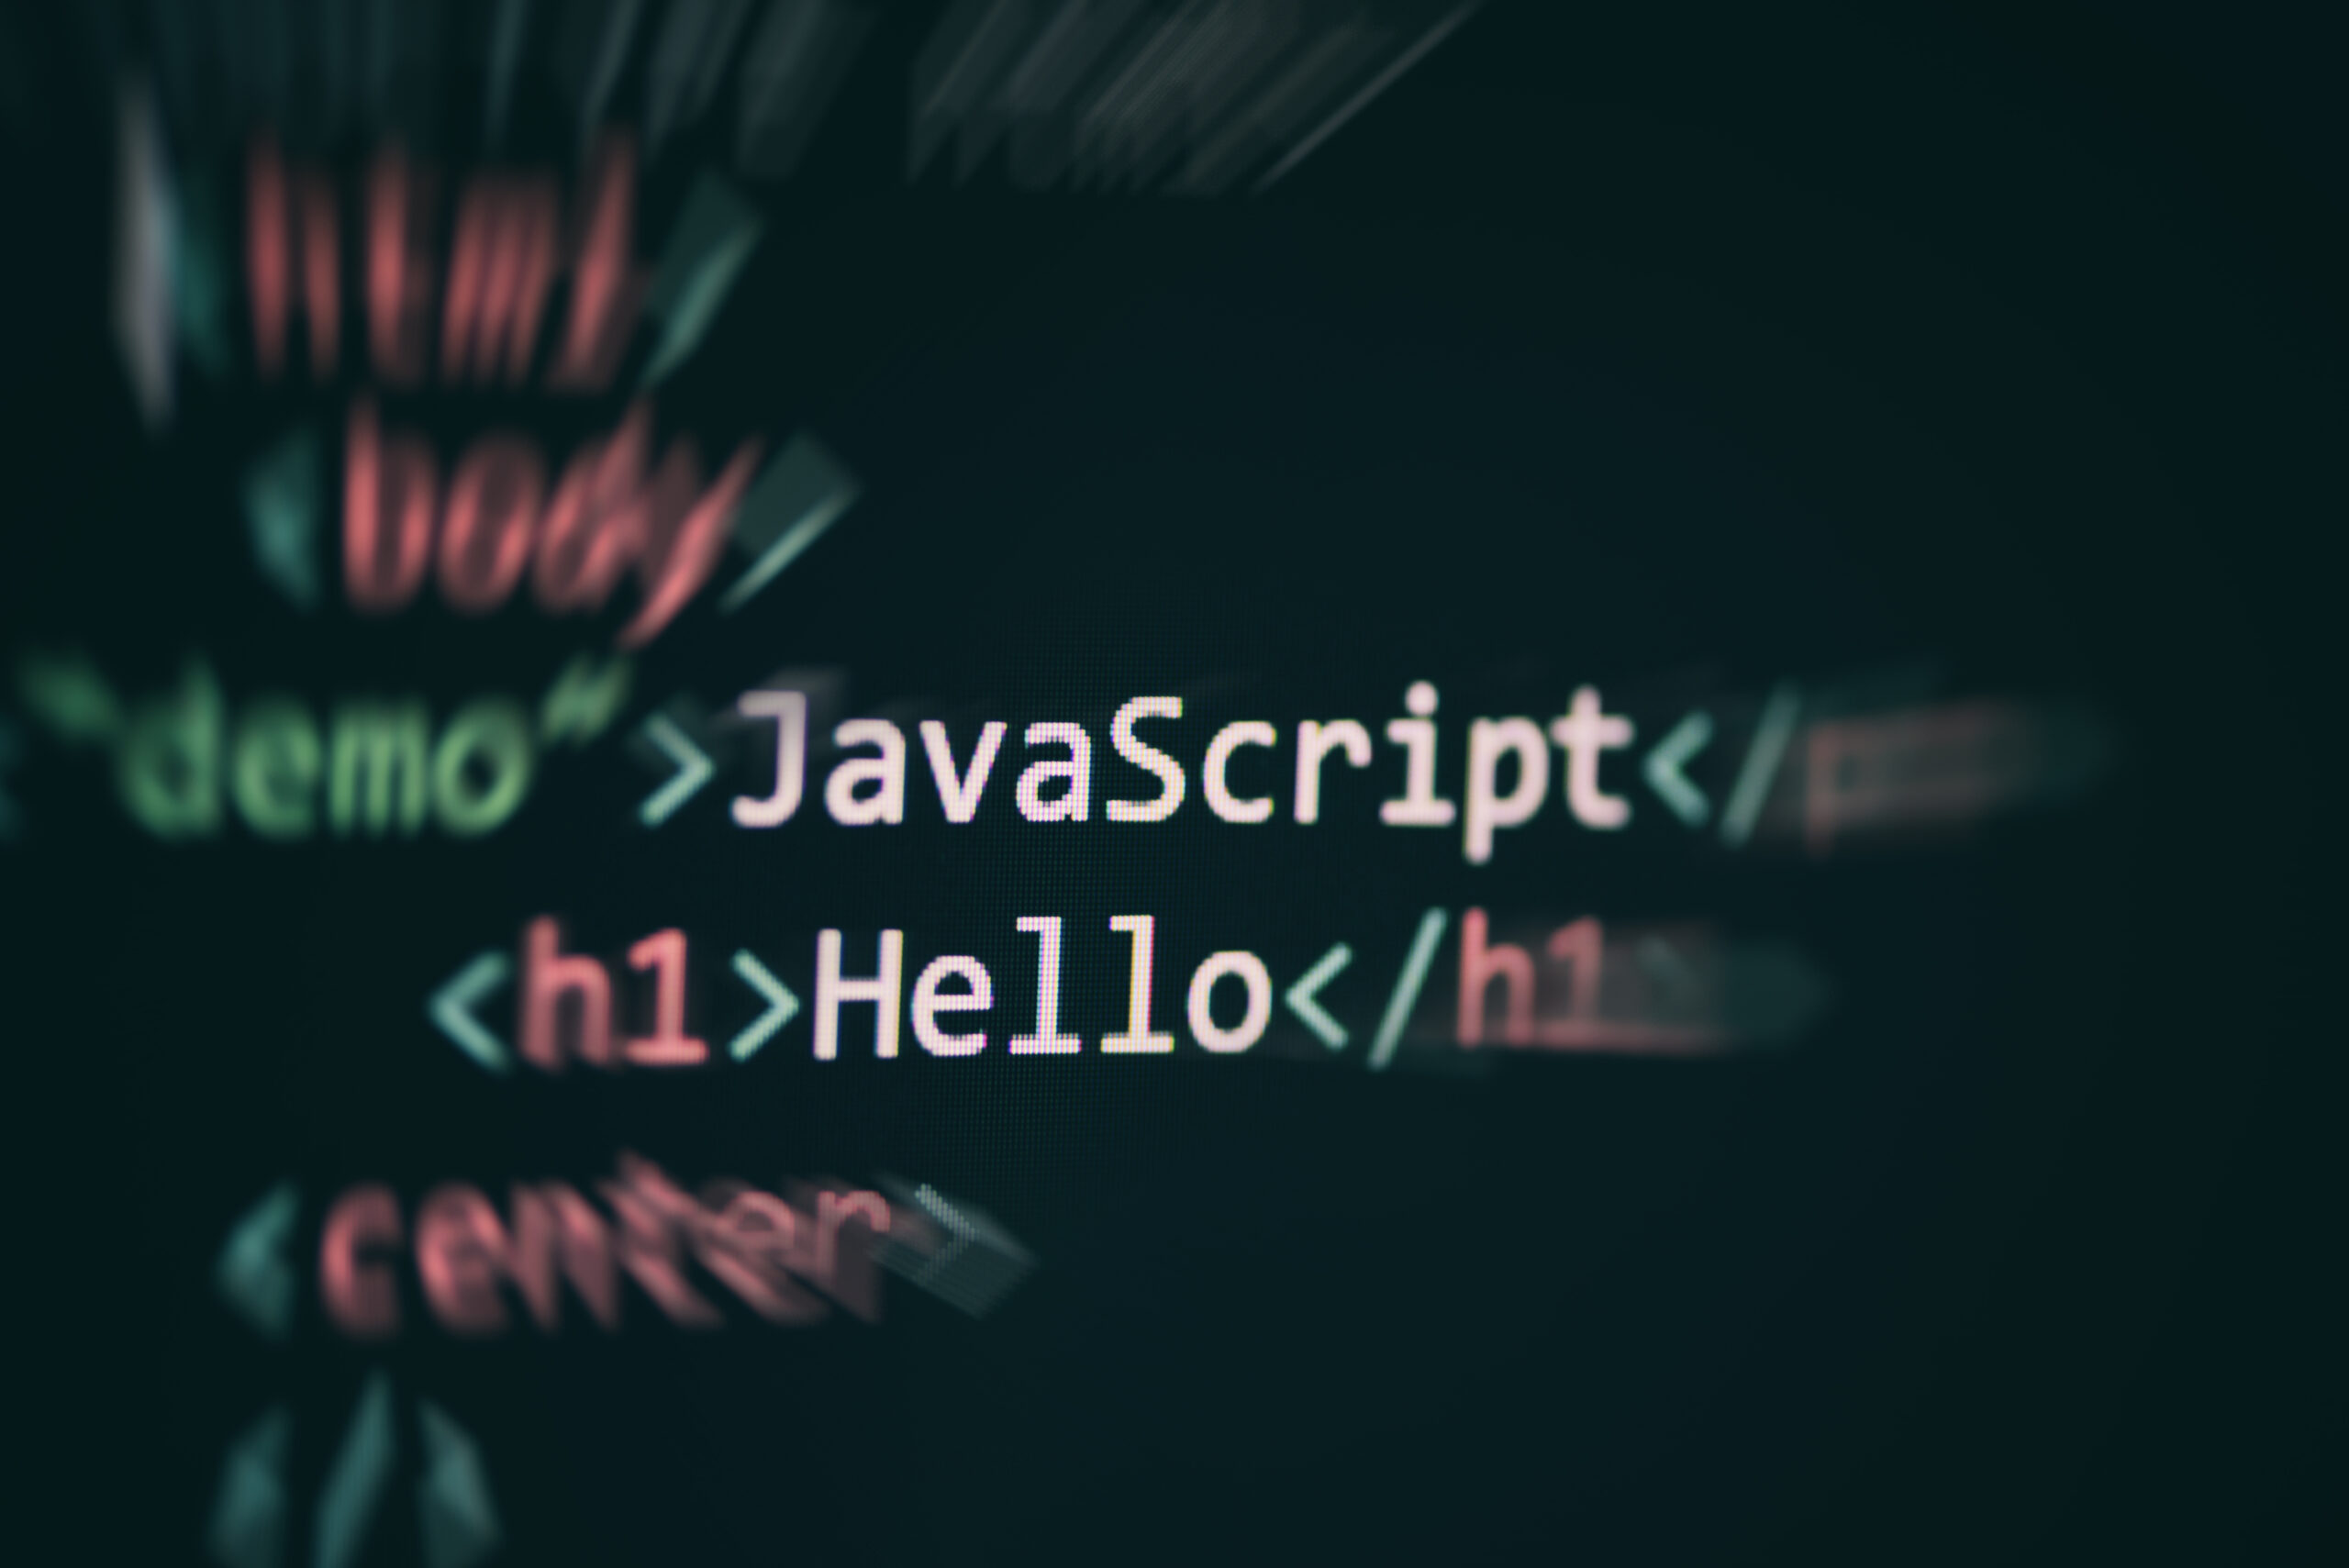 what is javascript